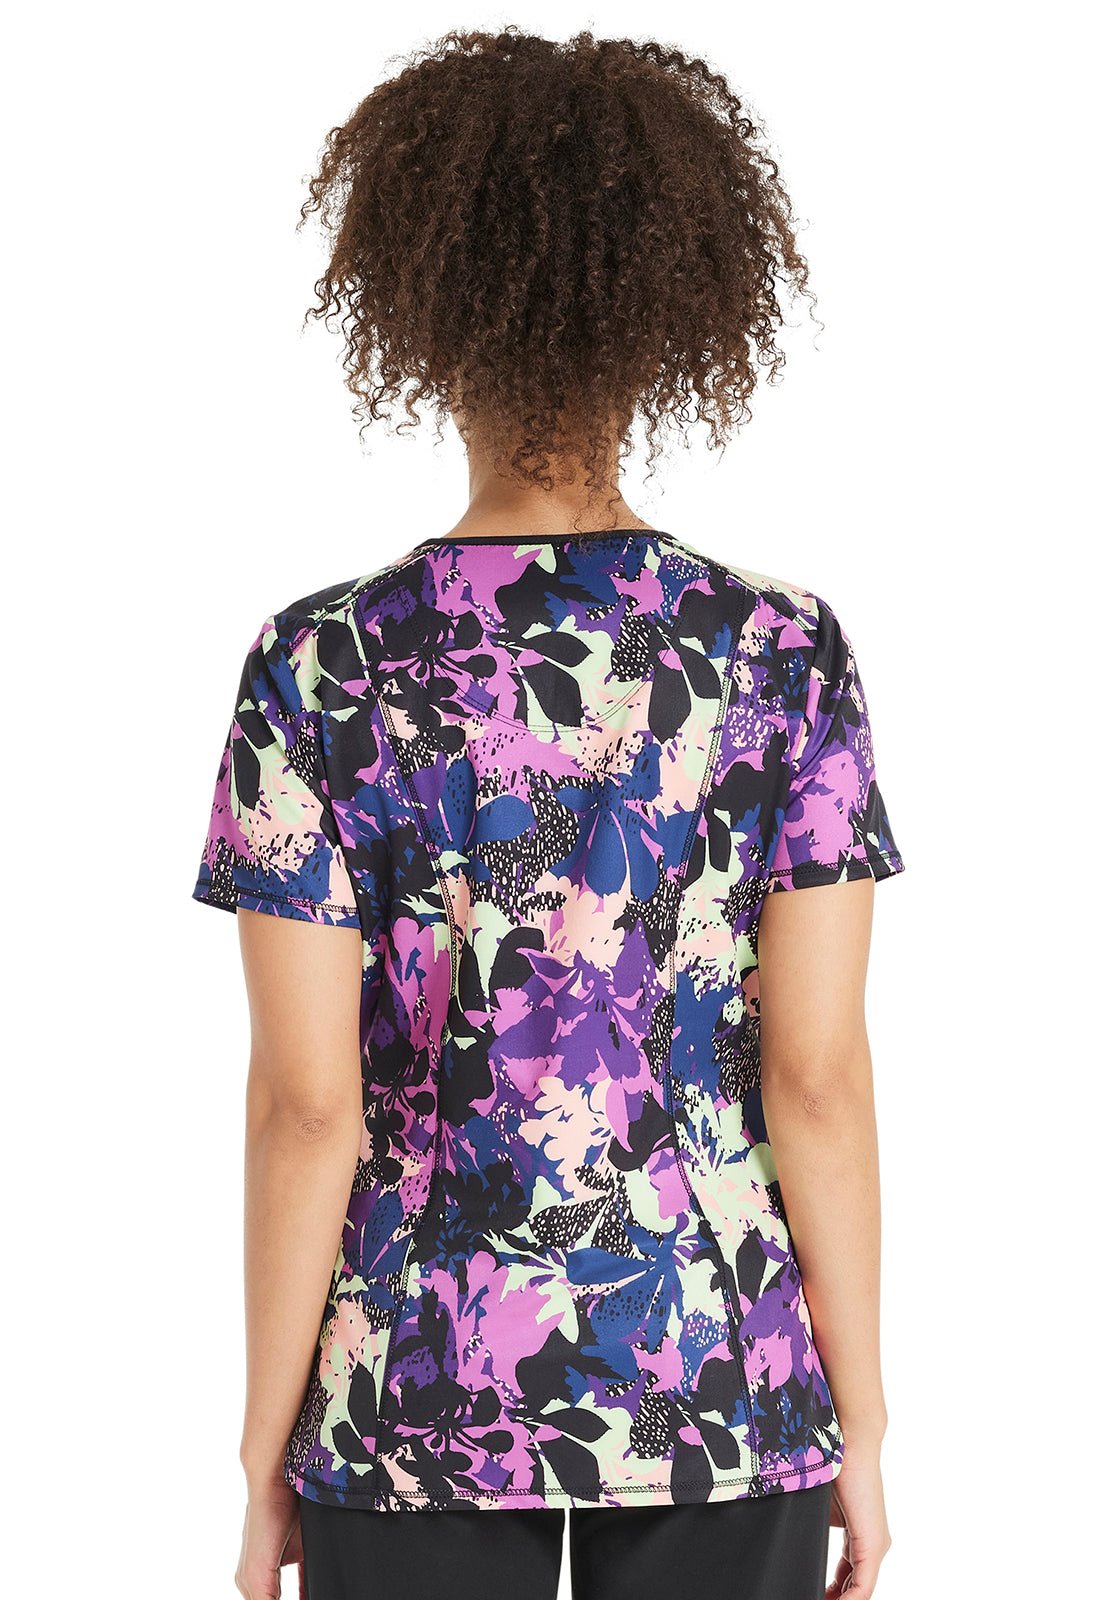 NEW from Infinity Scrubs: Orchid Flower